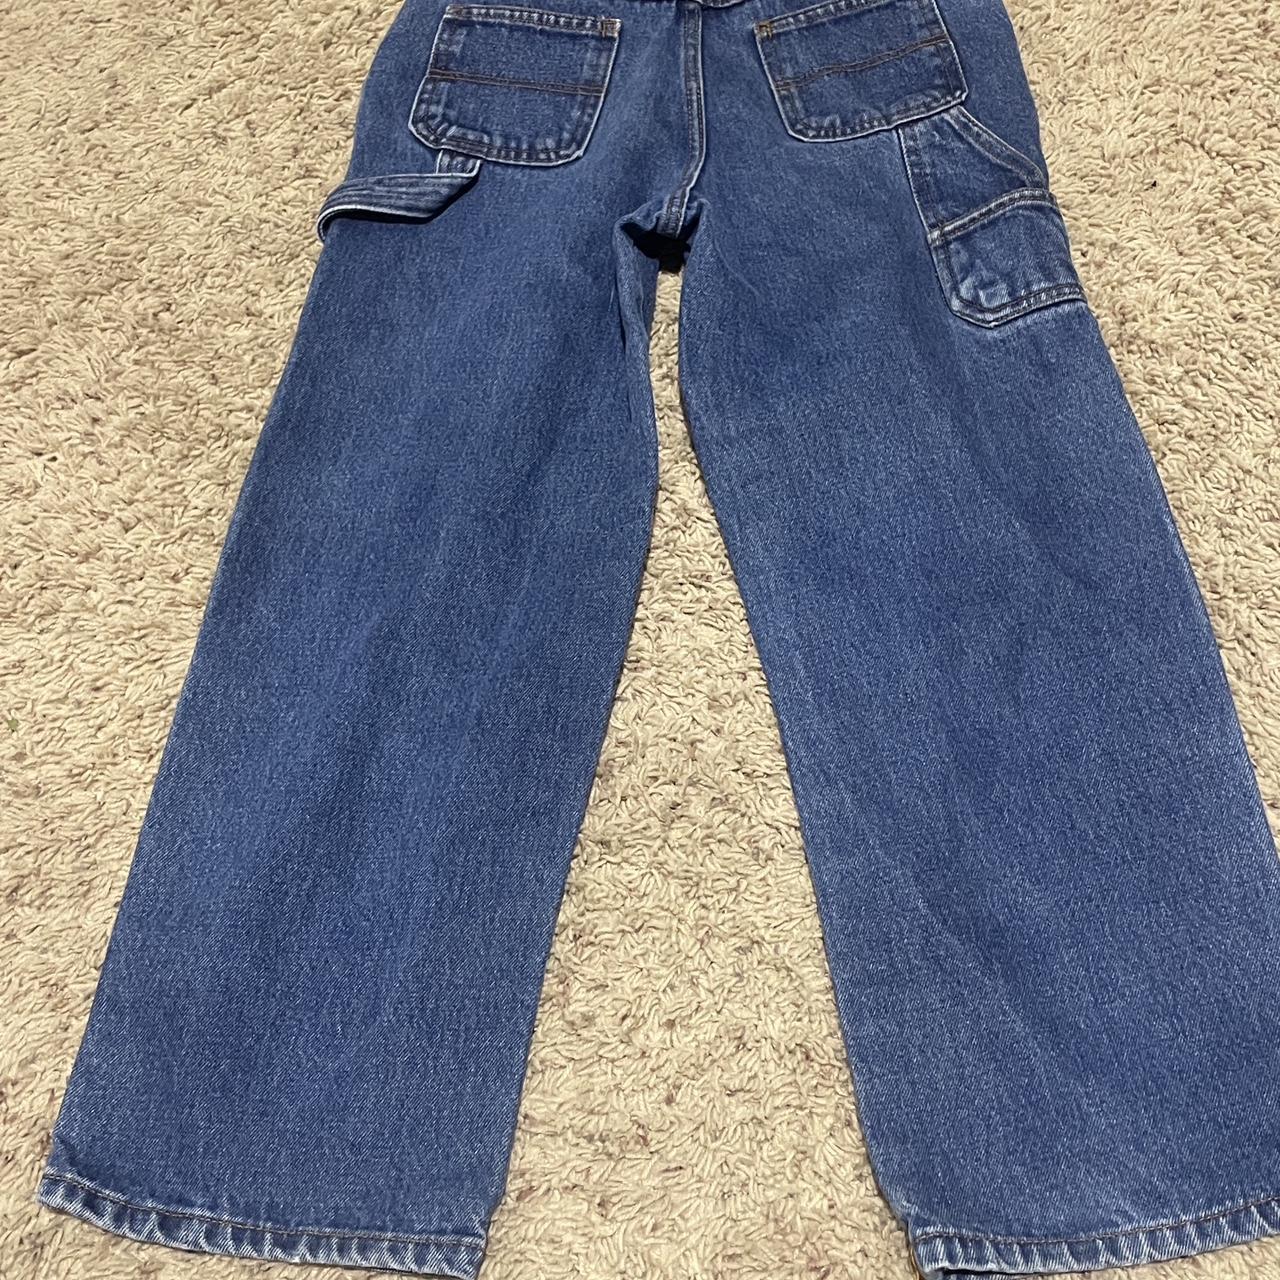 THE CUTEST VINTAGE JEANS EVER! These were my all... - Depop